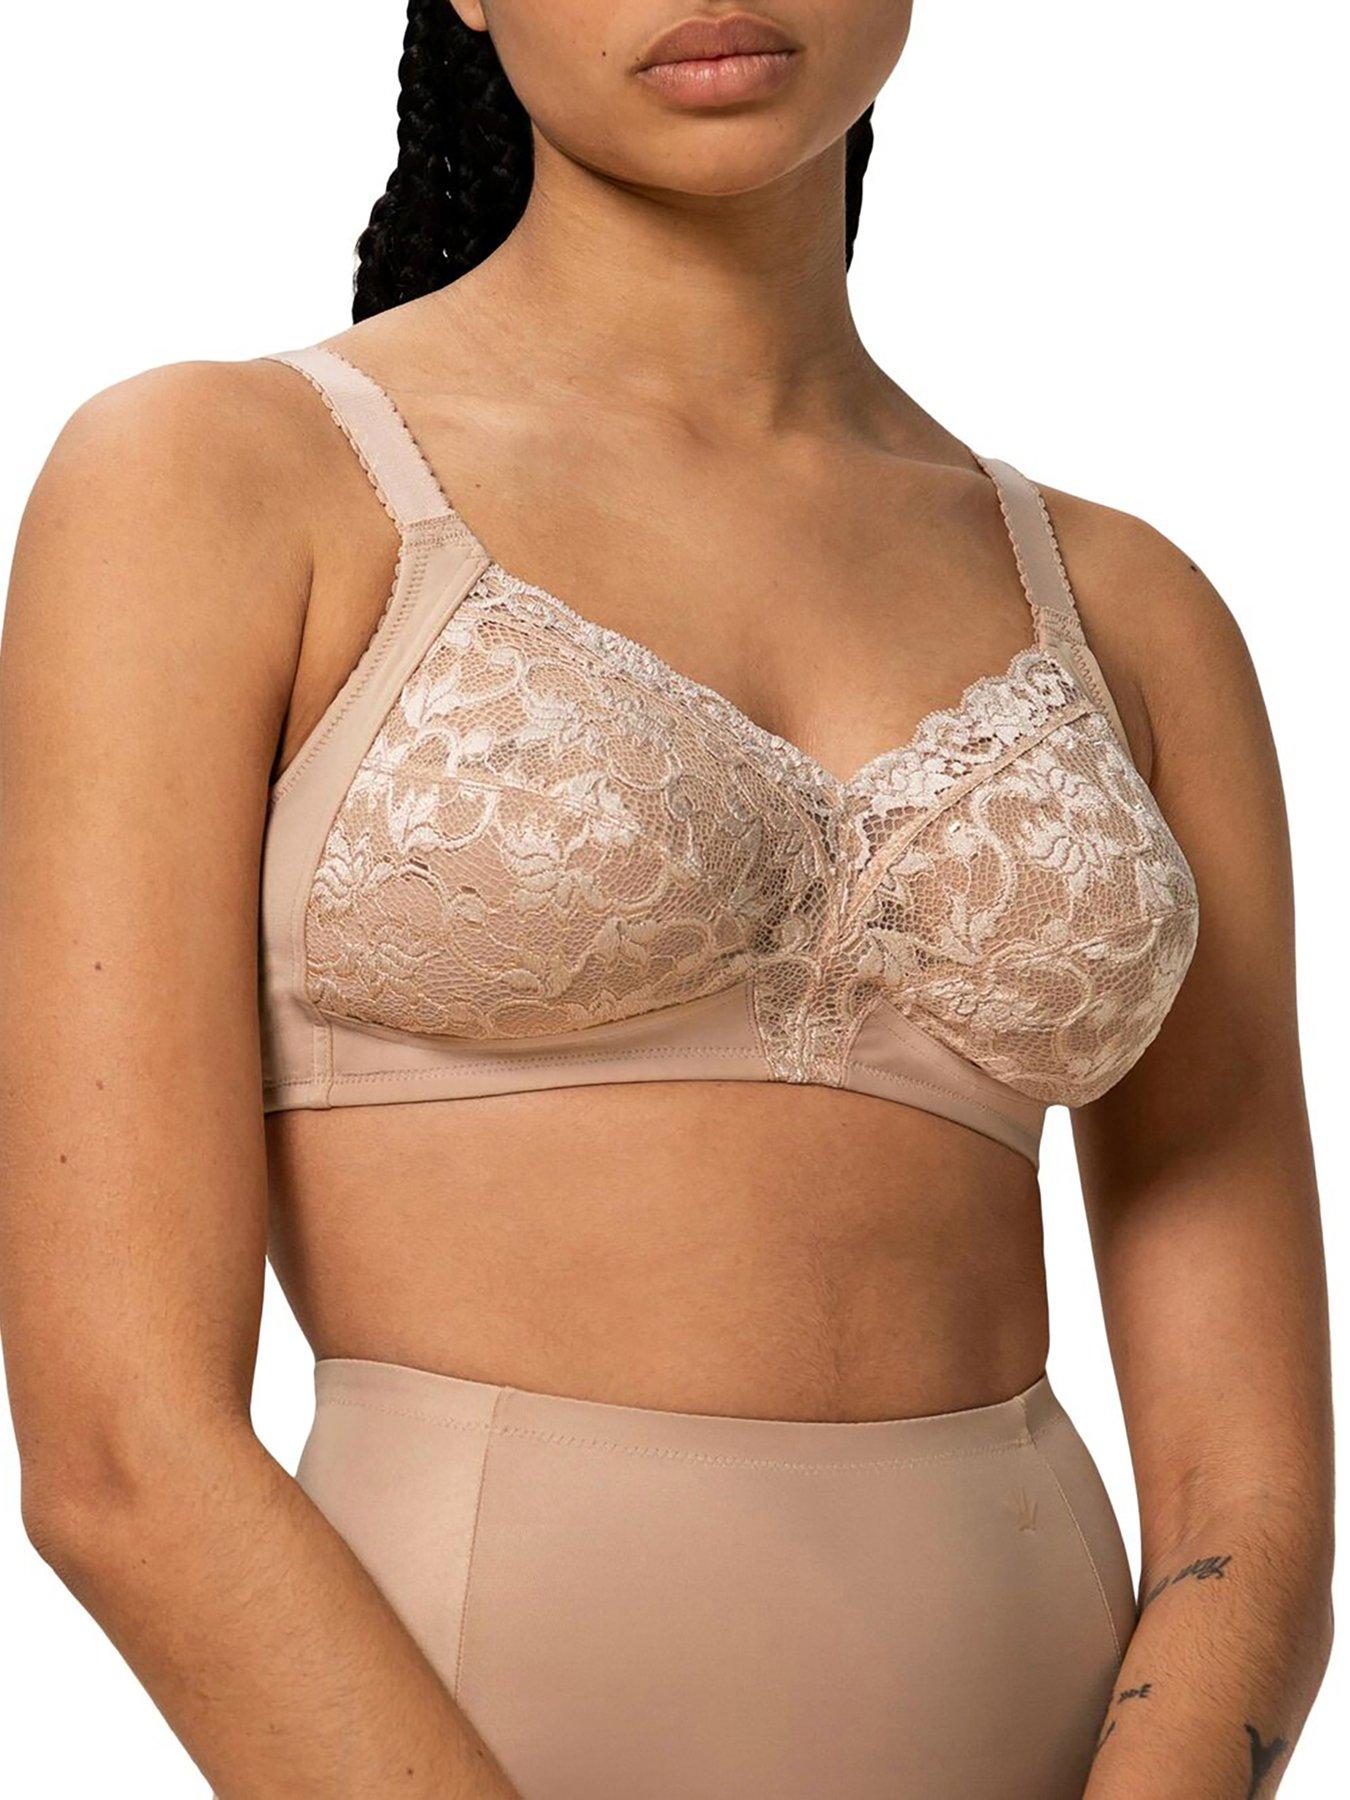 Nudi Boobies Invisible Bra for an extra full cup size! – SECRET WEAPONS  AUSTRALIA